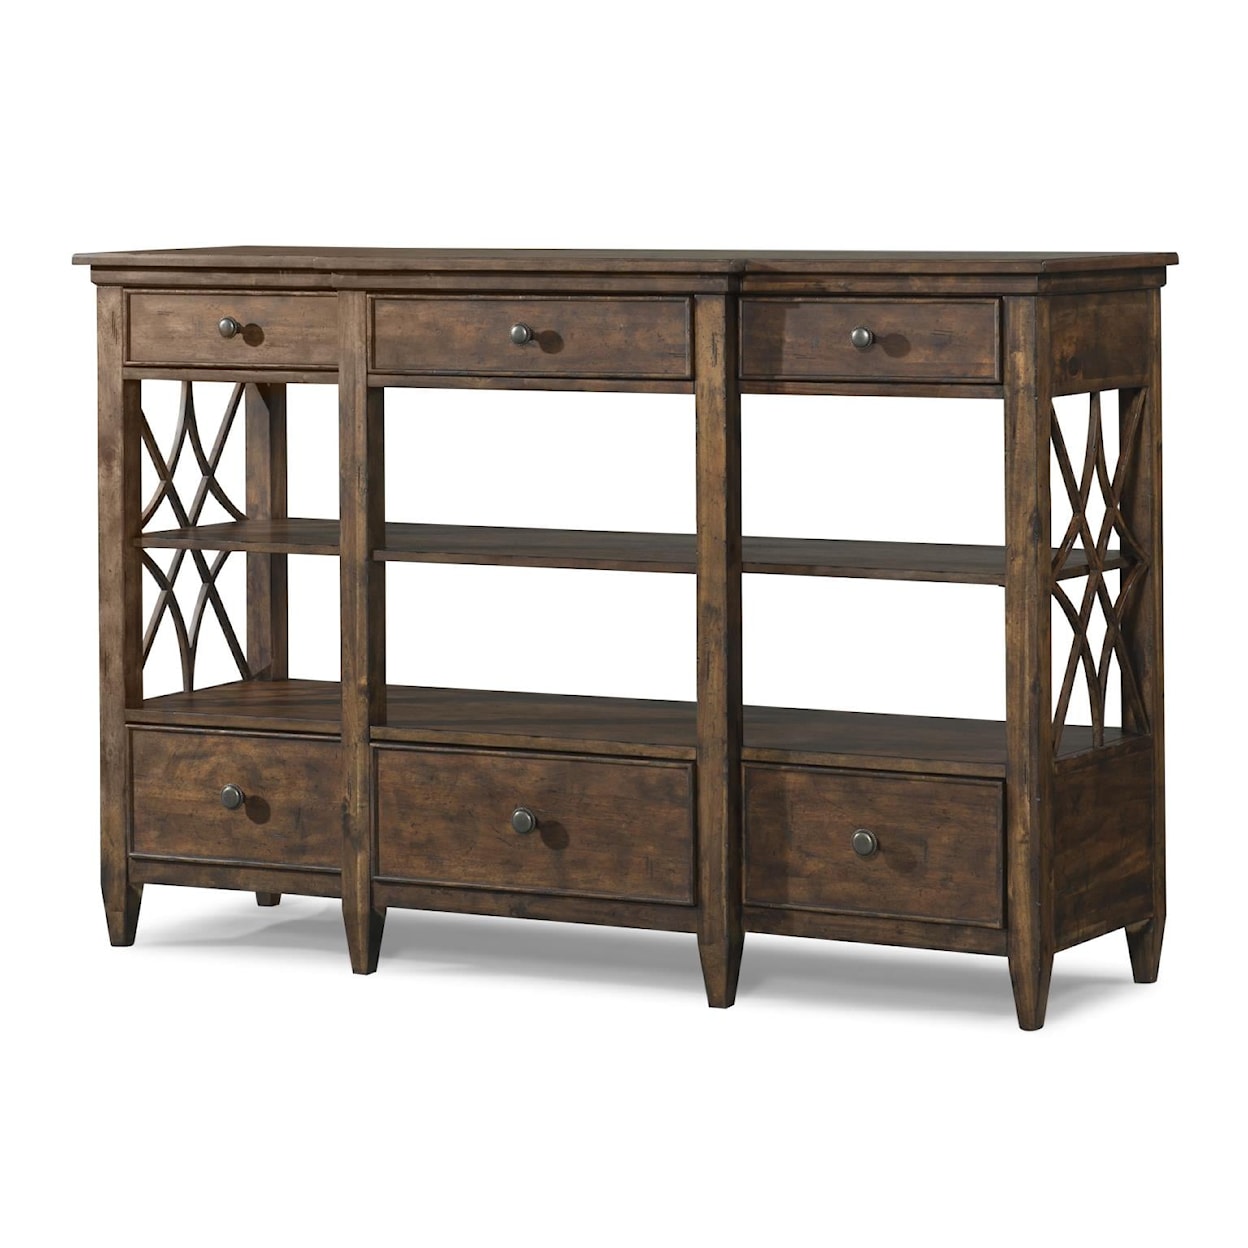 Trisha Yearwood Home Collection by Legacy Classic Trisha Yearwood Home Sideboard